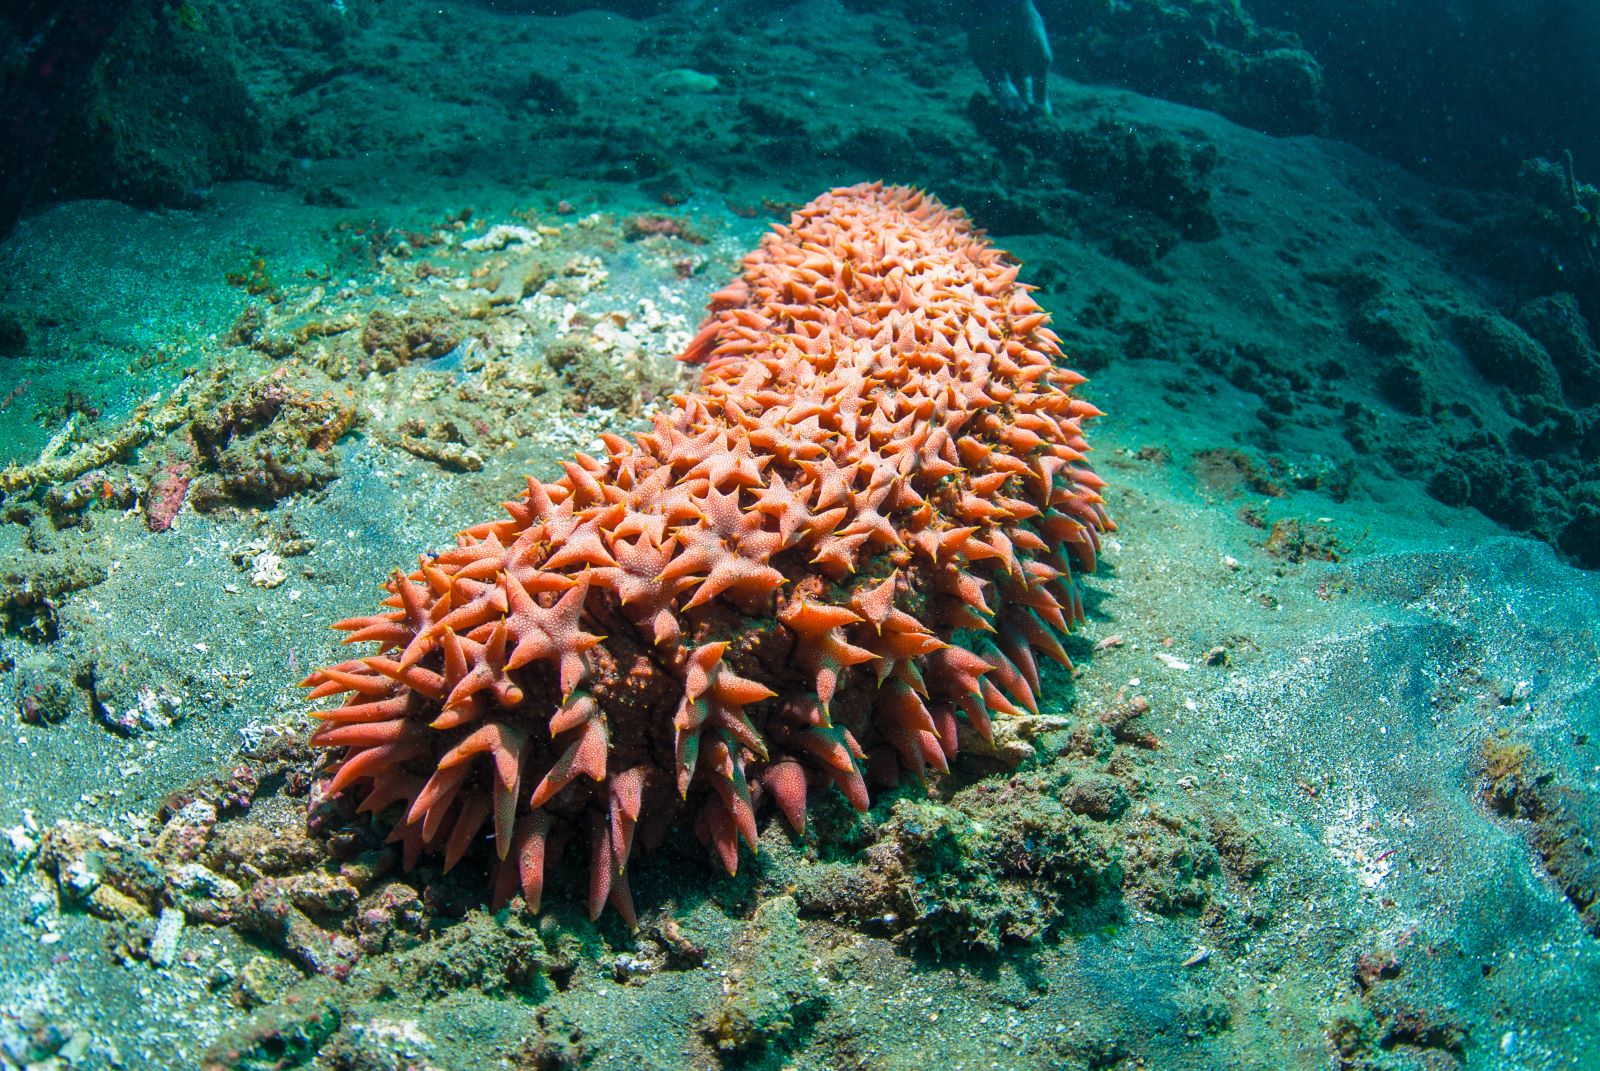 Can sea cucumber help fight cancer?